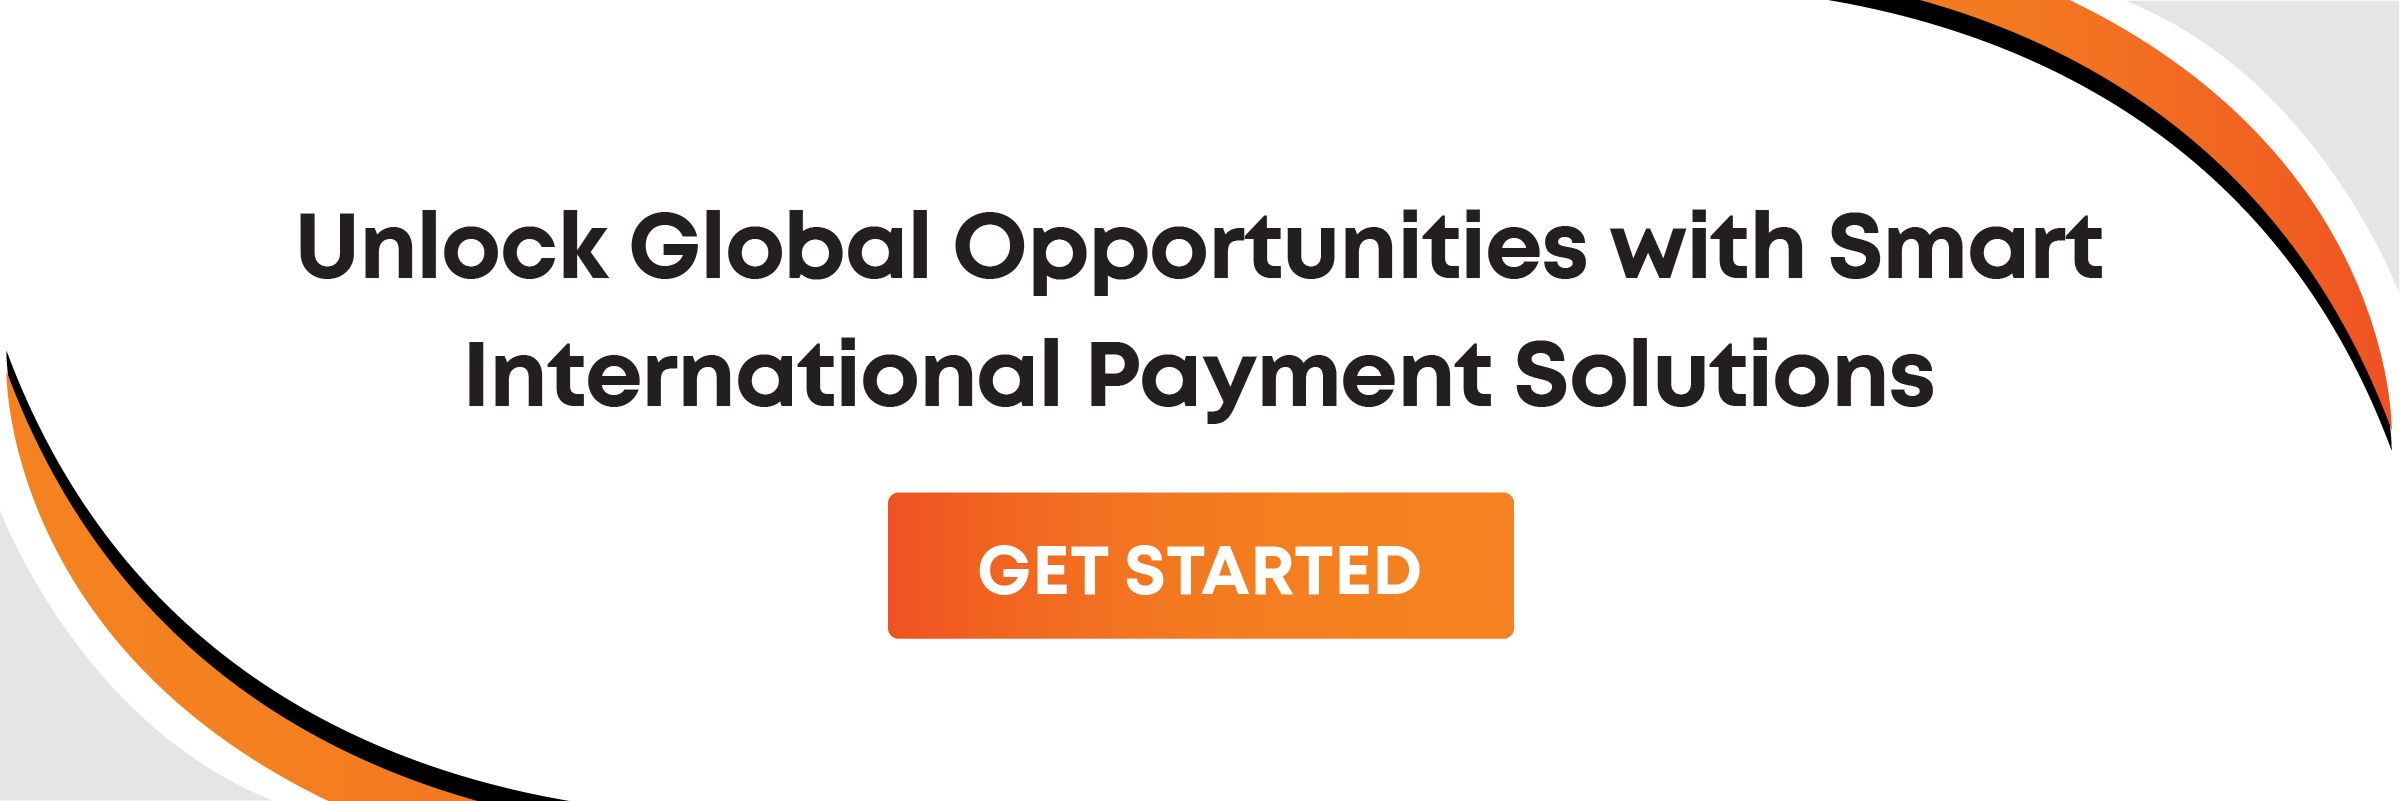 To find out more about foreign exchange and global payment solutions for businesses